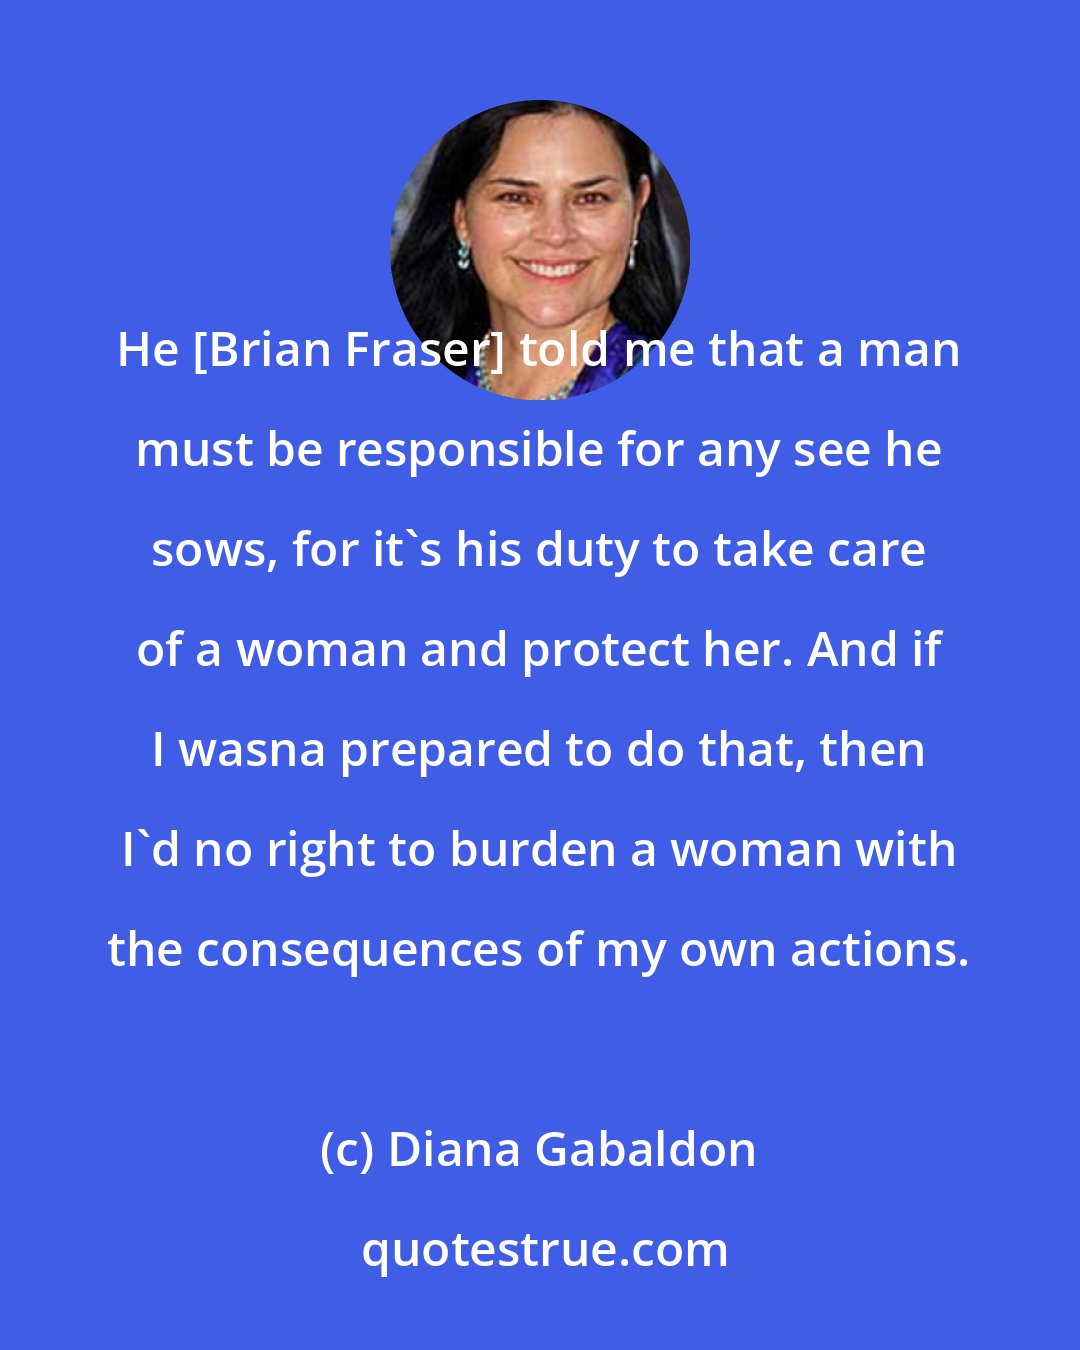 Diana Gabaldon: He [Brian Fraser] told me that a man must be responsible for any see he sows, for it's his duty to take care of a woman and protect her. And if I wasna prepared to do that, then I'd no right to burden a woman with the consequences of my own actions.